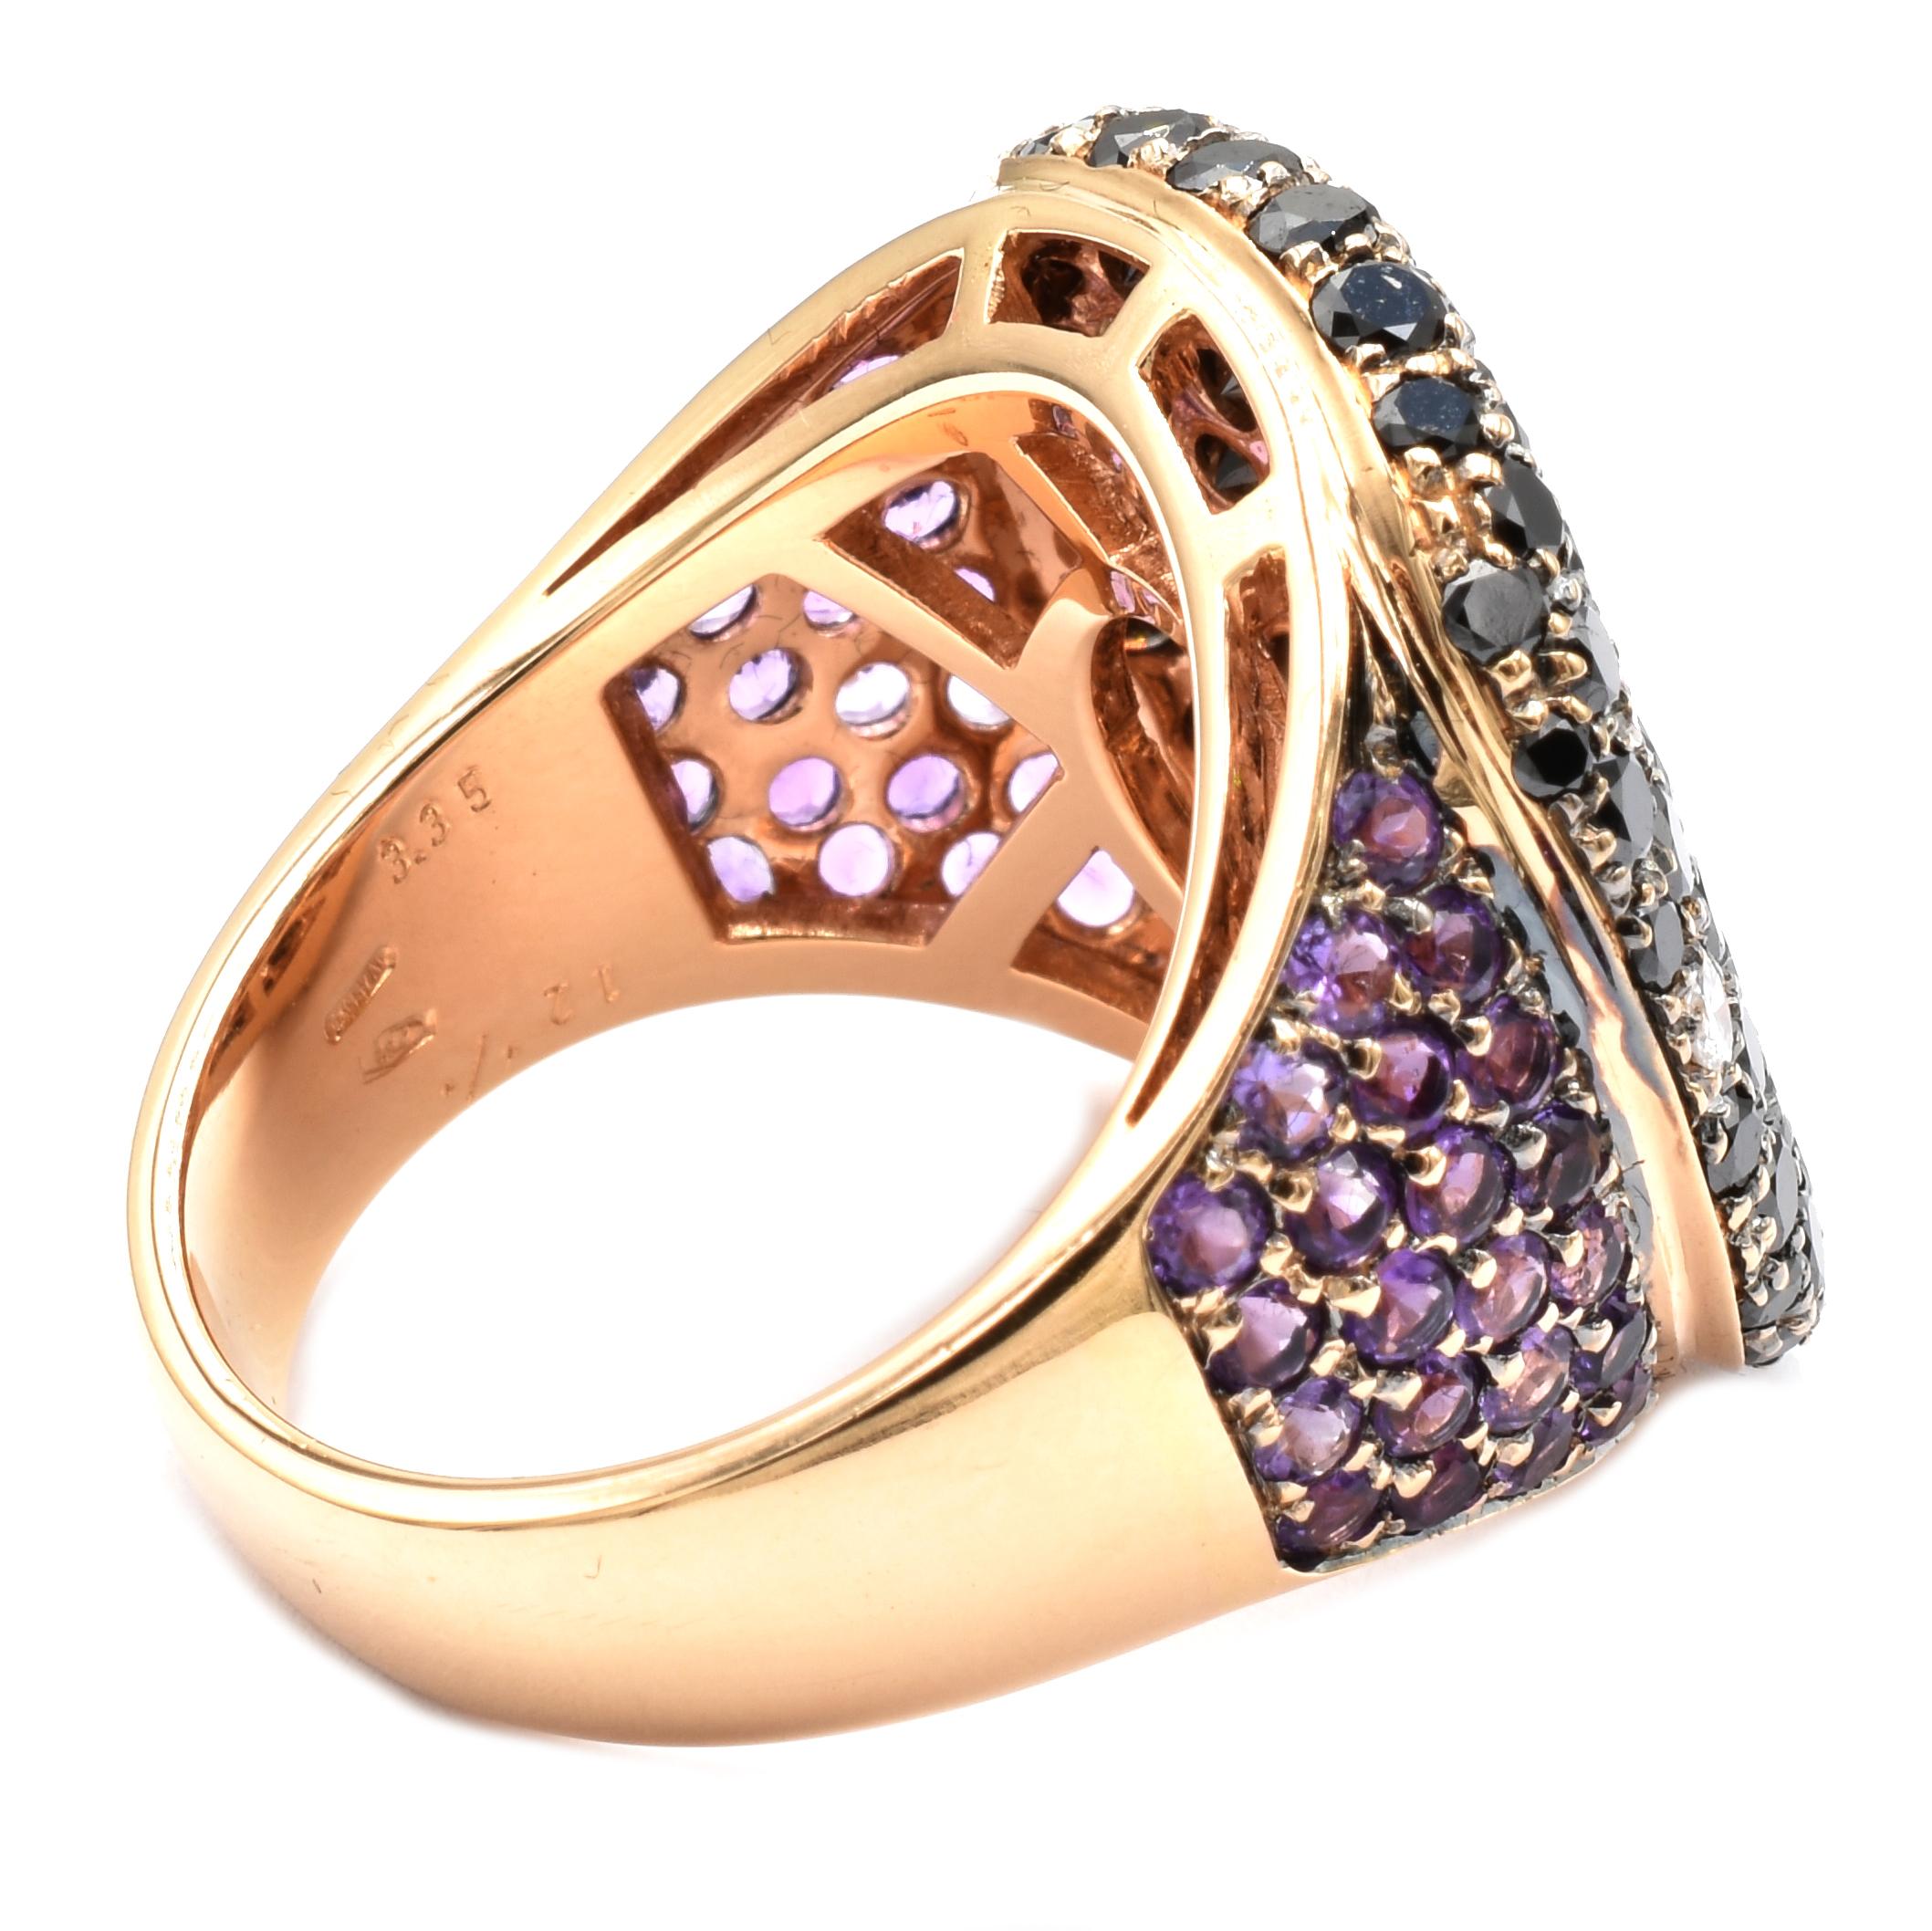 Contemporary Gilberto Cassola Black Diamonds and Amethyst Rose Gold Ring Made in Italy For Sale